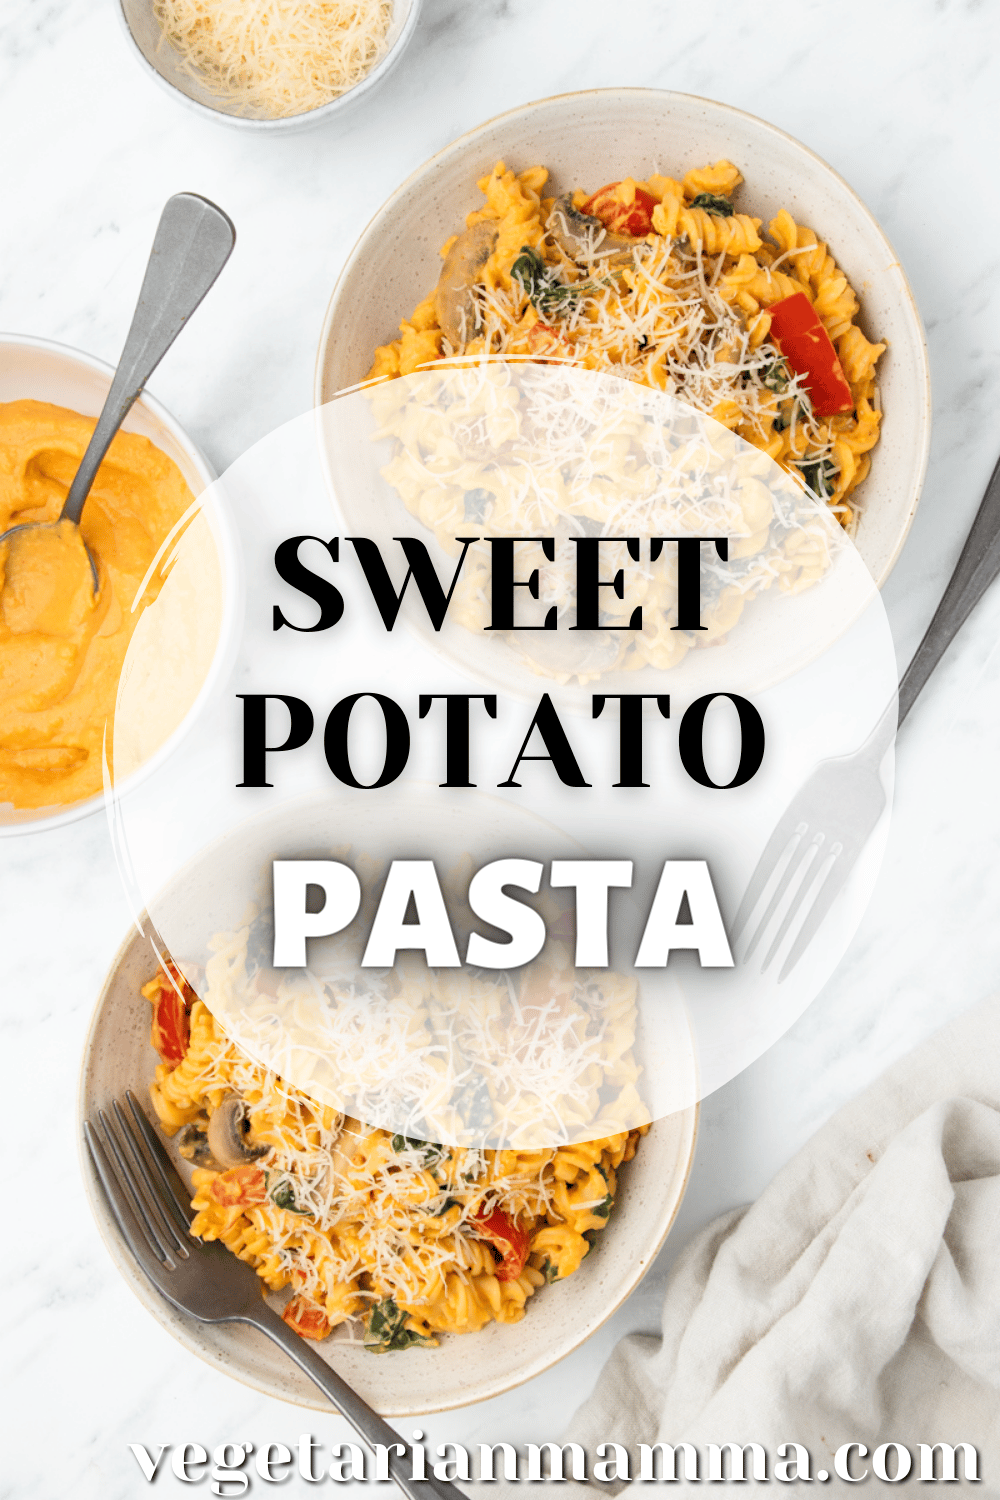 This healthy sweet potato pasta is completely delicious and super simple to make! Packed with veggies both in the dish, and blended into the sauce, it's a nutritious meal that the whole family will devour.